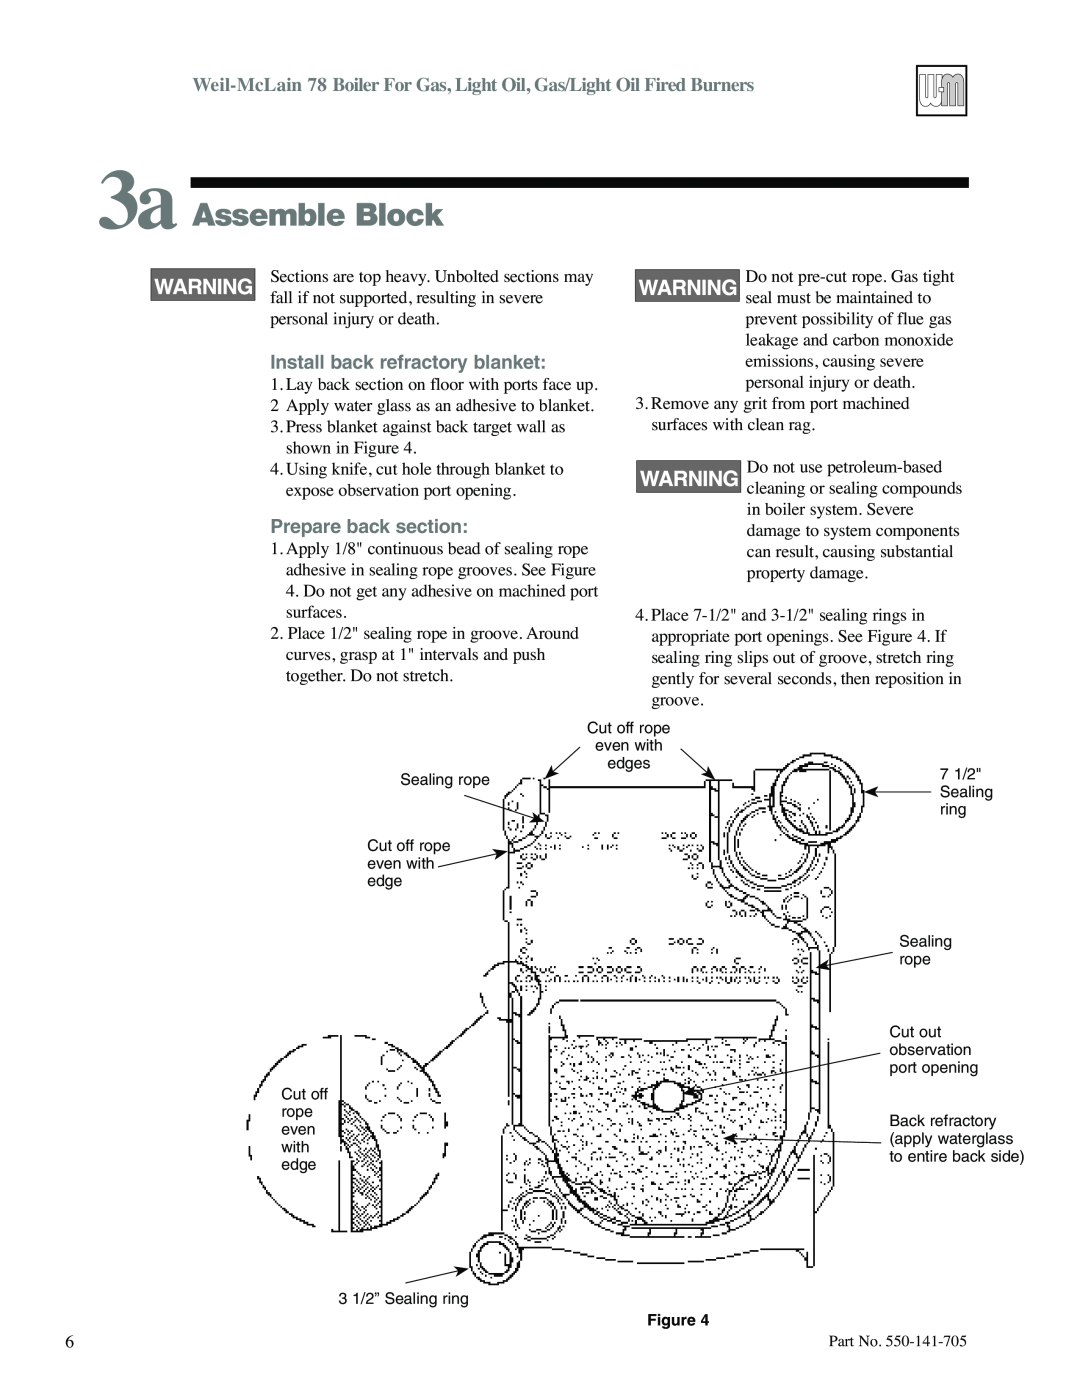 Weil-McLain 78 manual 3a Assemble Block, Install back refractory blanket, Prepare back section 